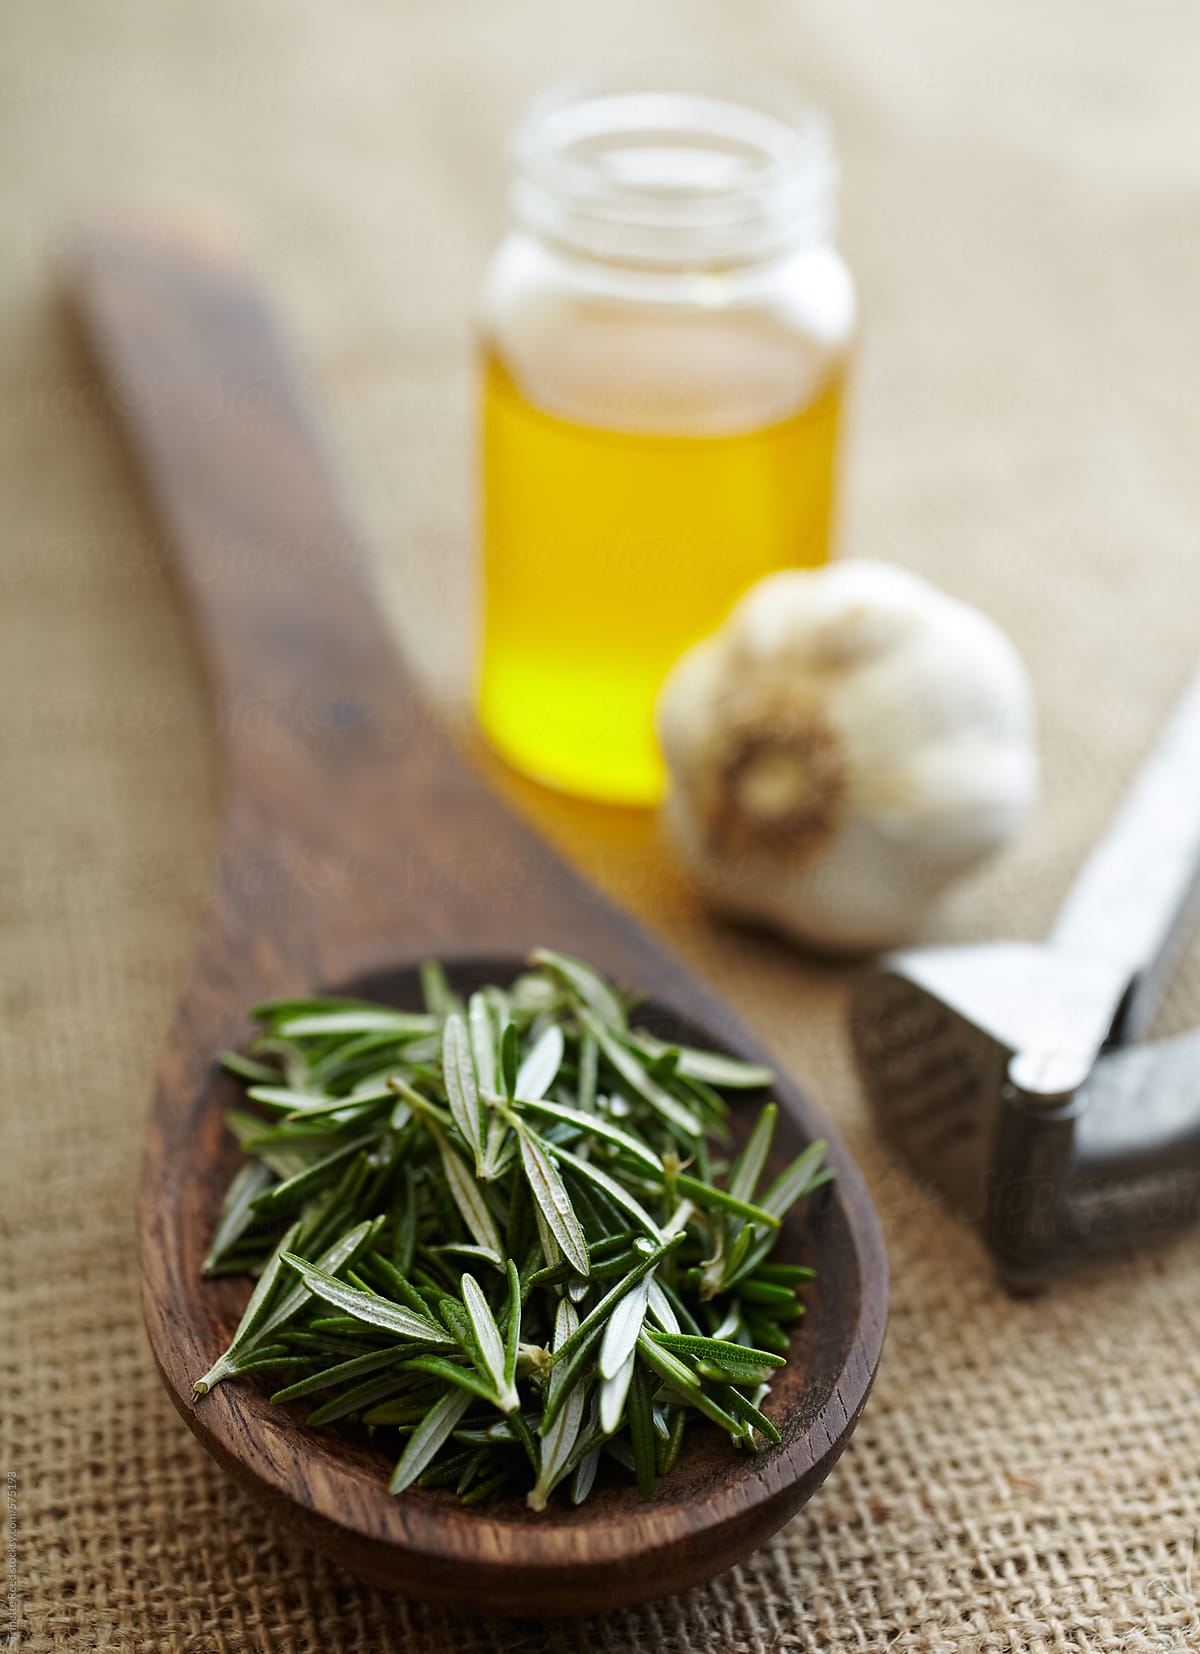 Rosemary with garlic and olive oil